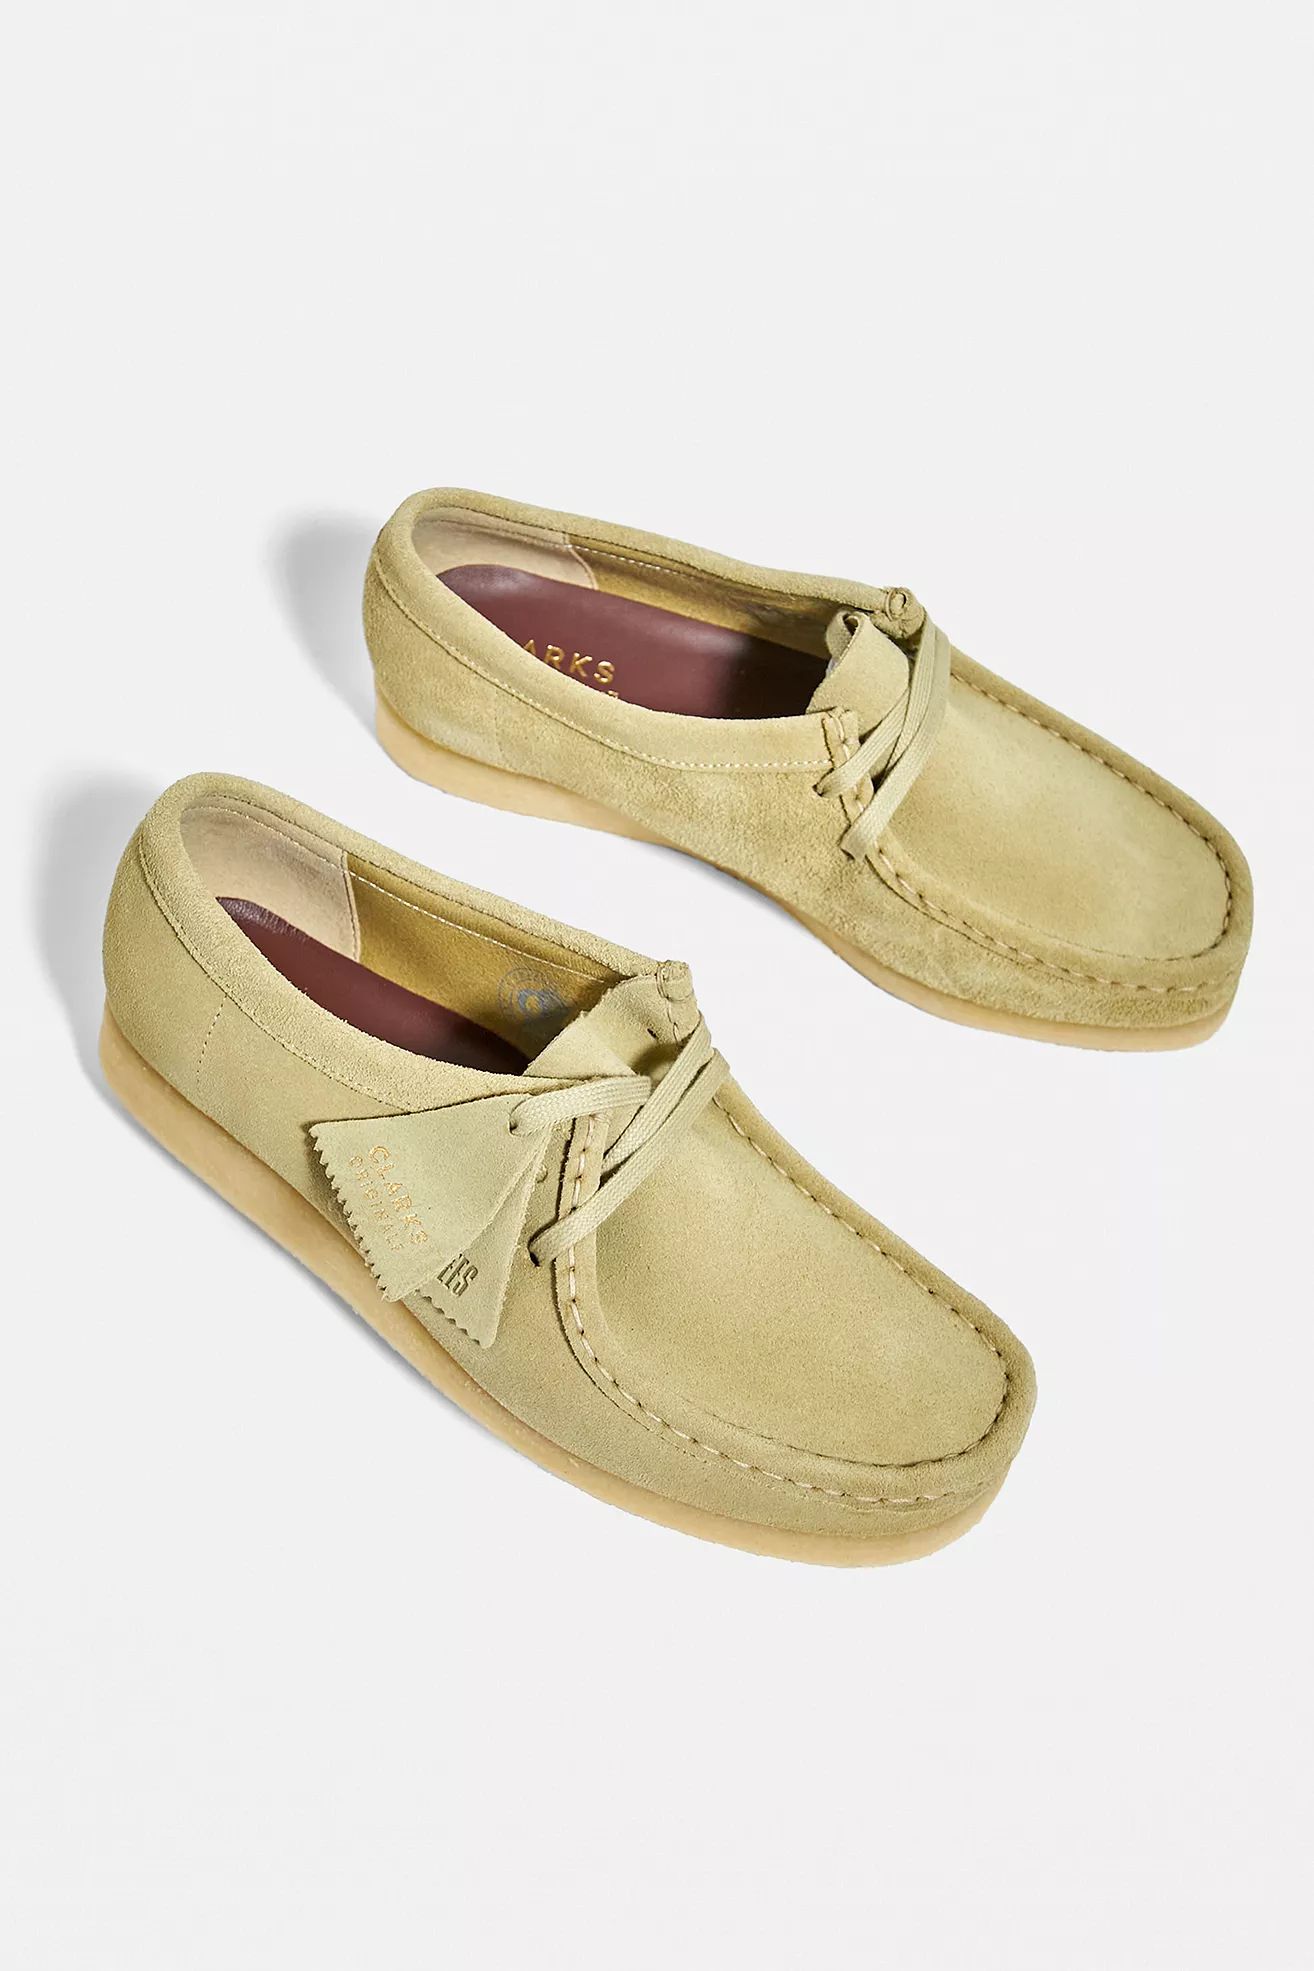 Clarks Originals Wallabee Maple Suede Shoes | Urban Outfitters (EU)